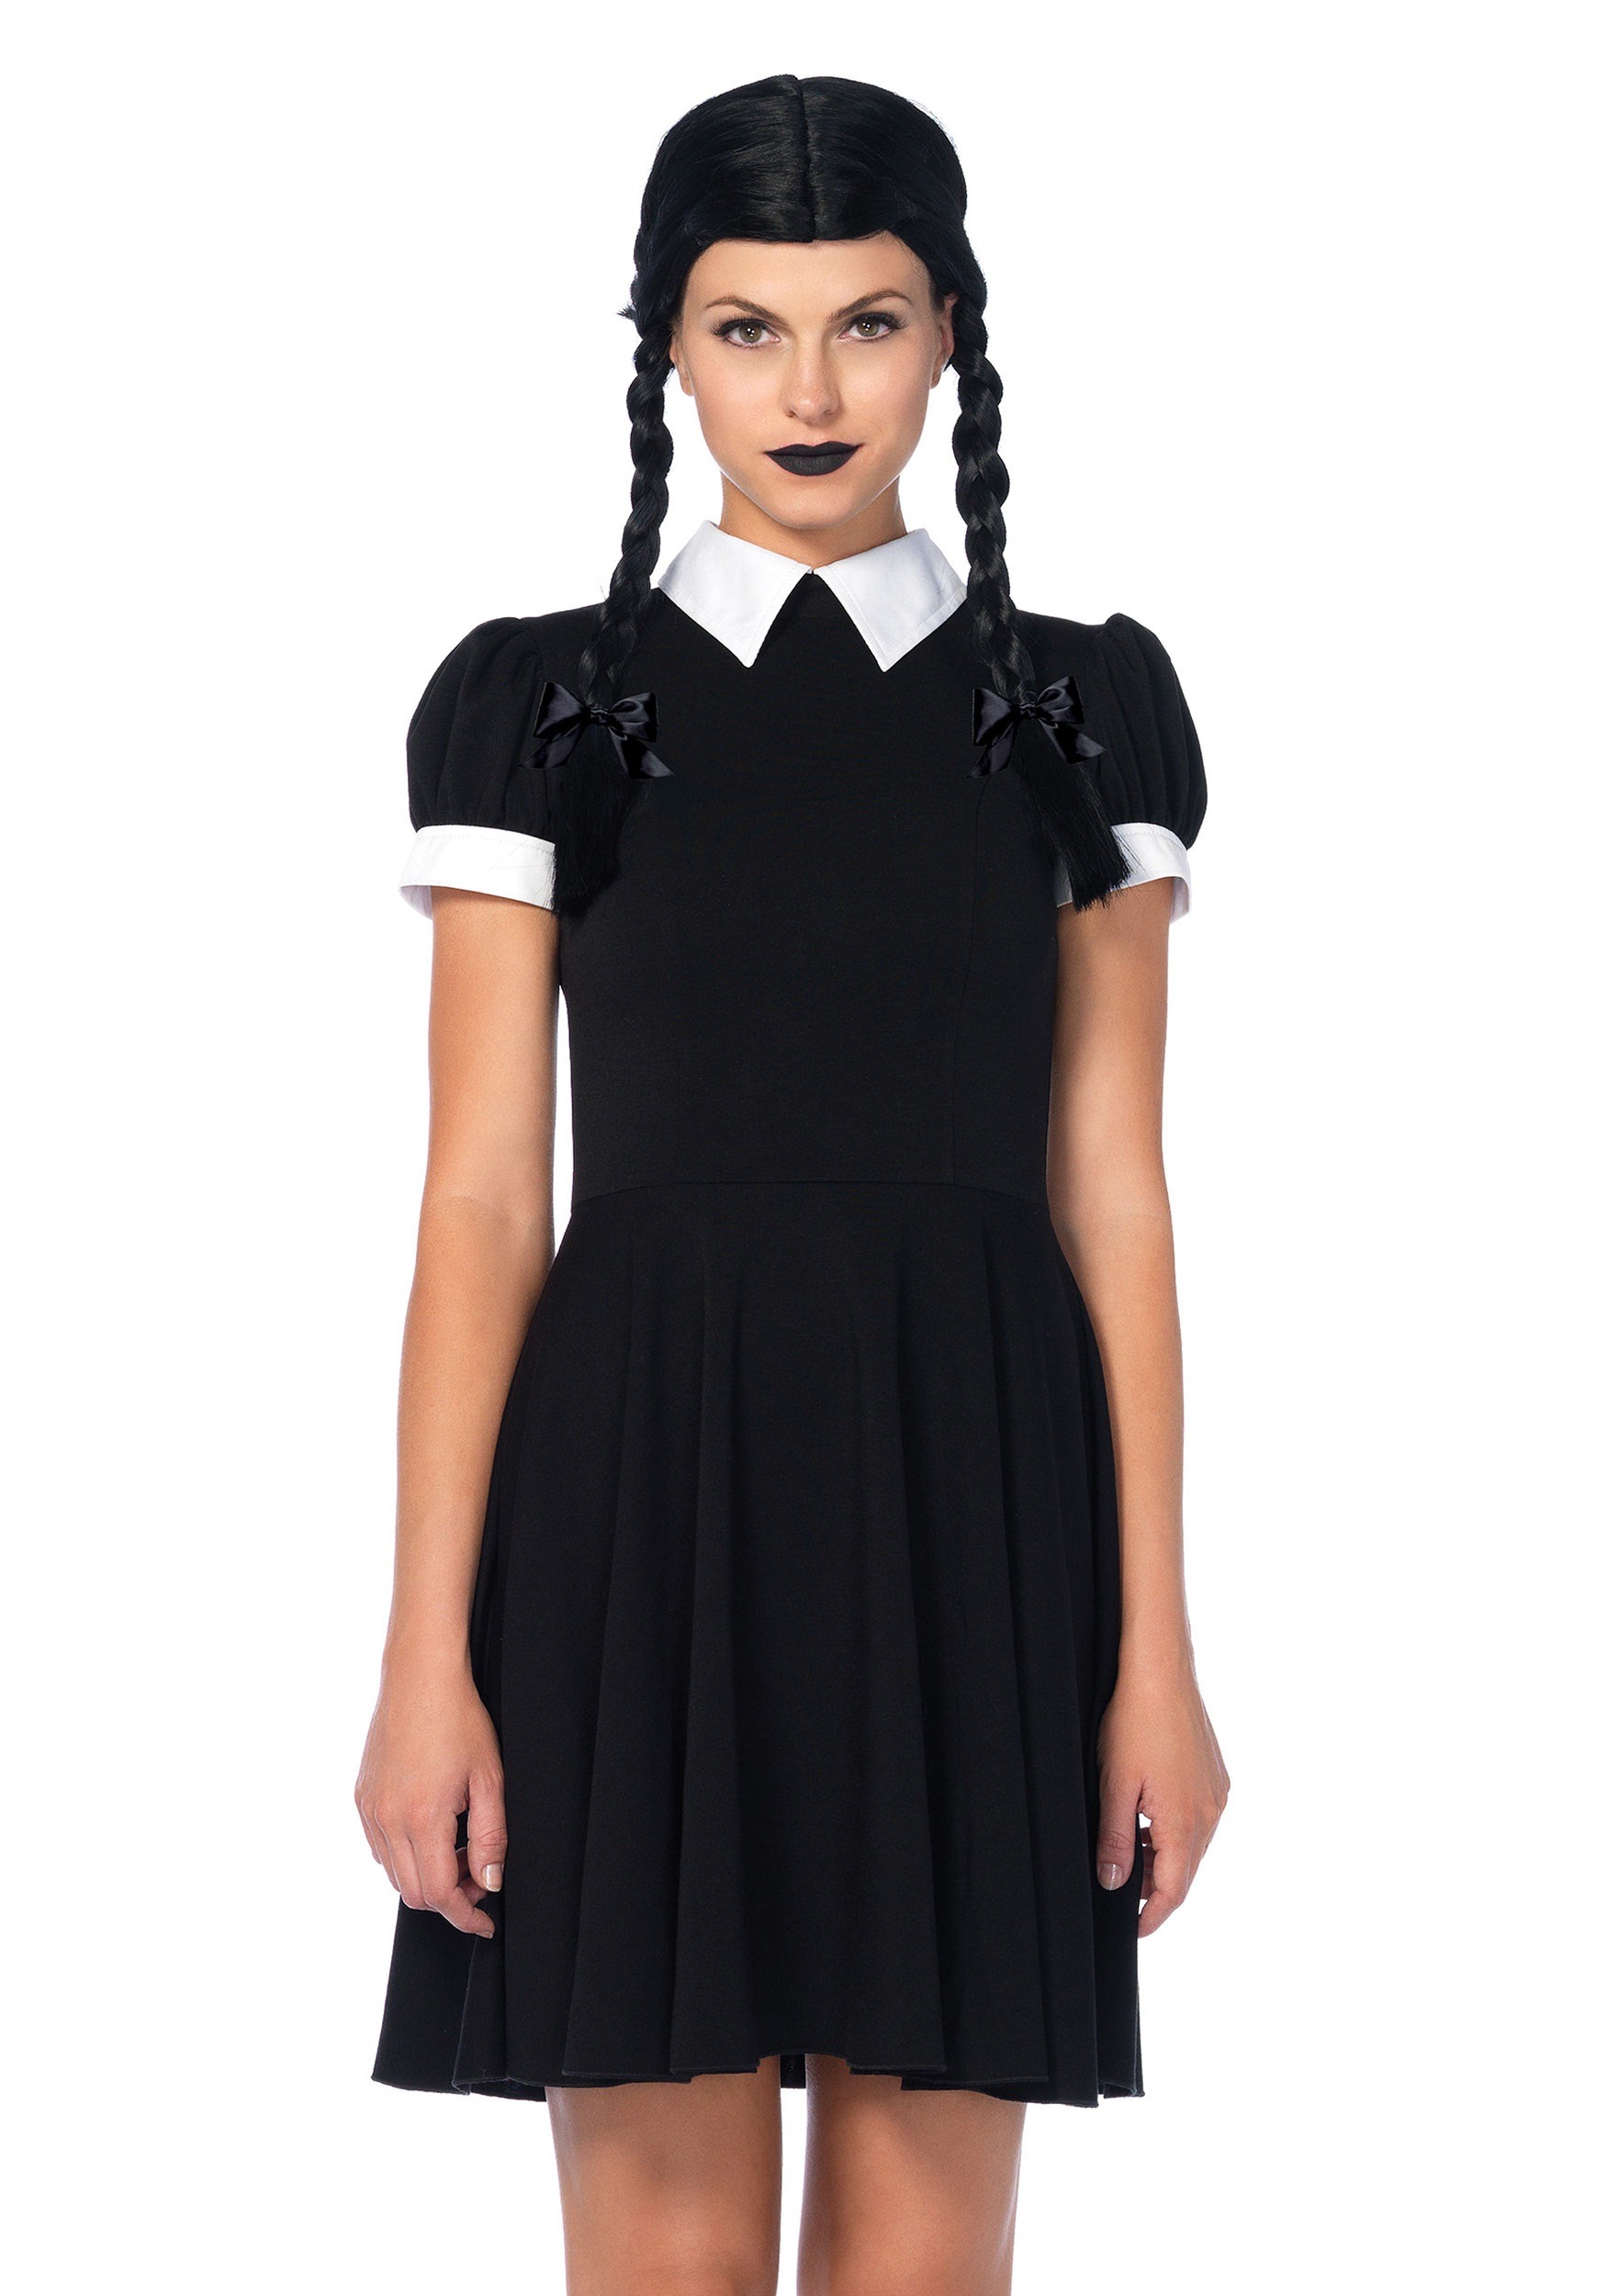 Image of Womens Gothic Darling Costume ID LE85562-M/L